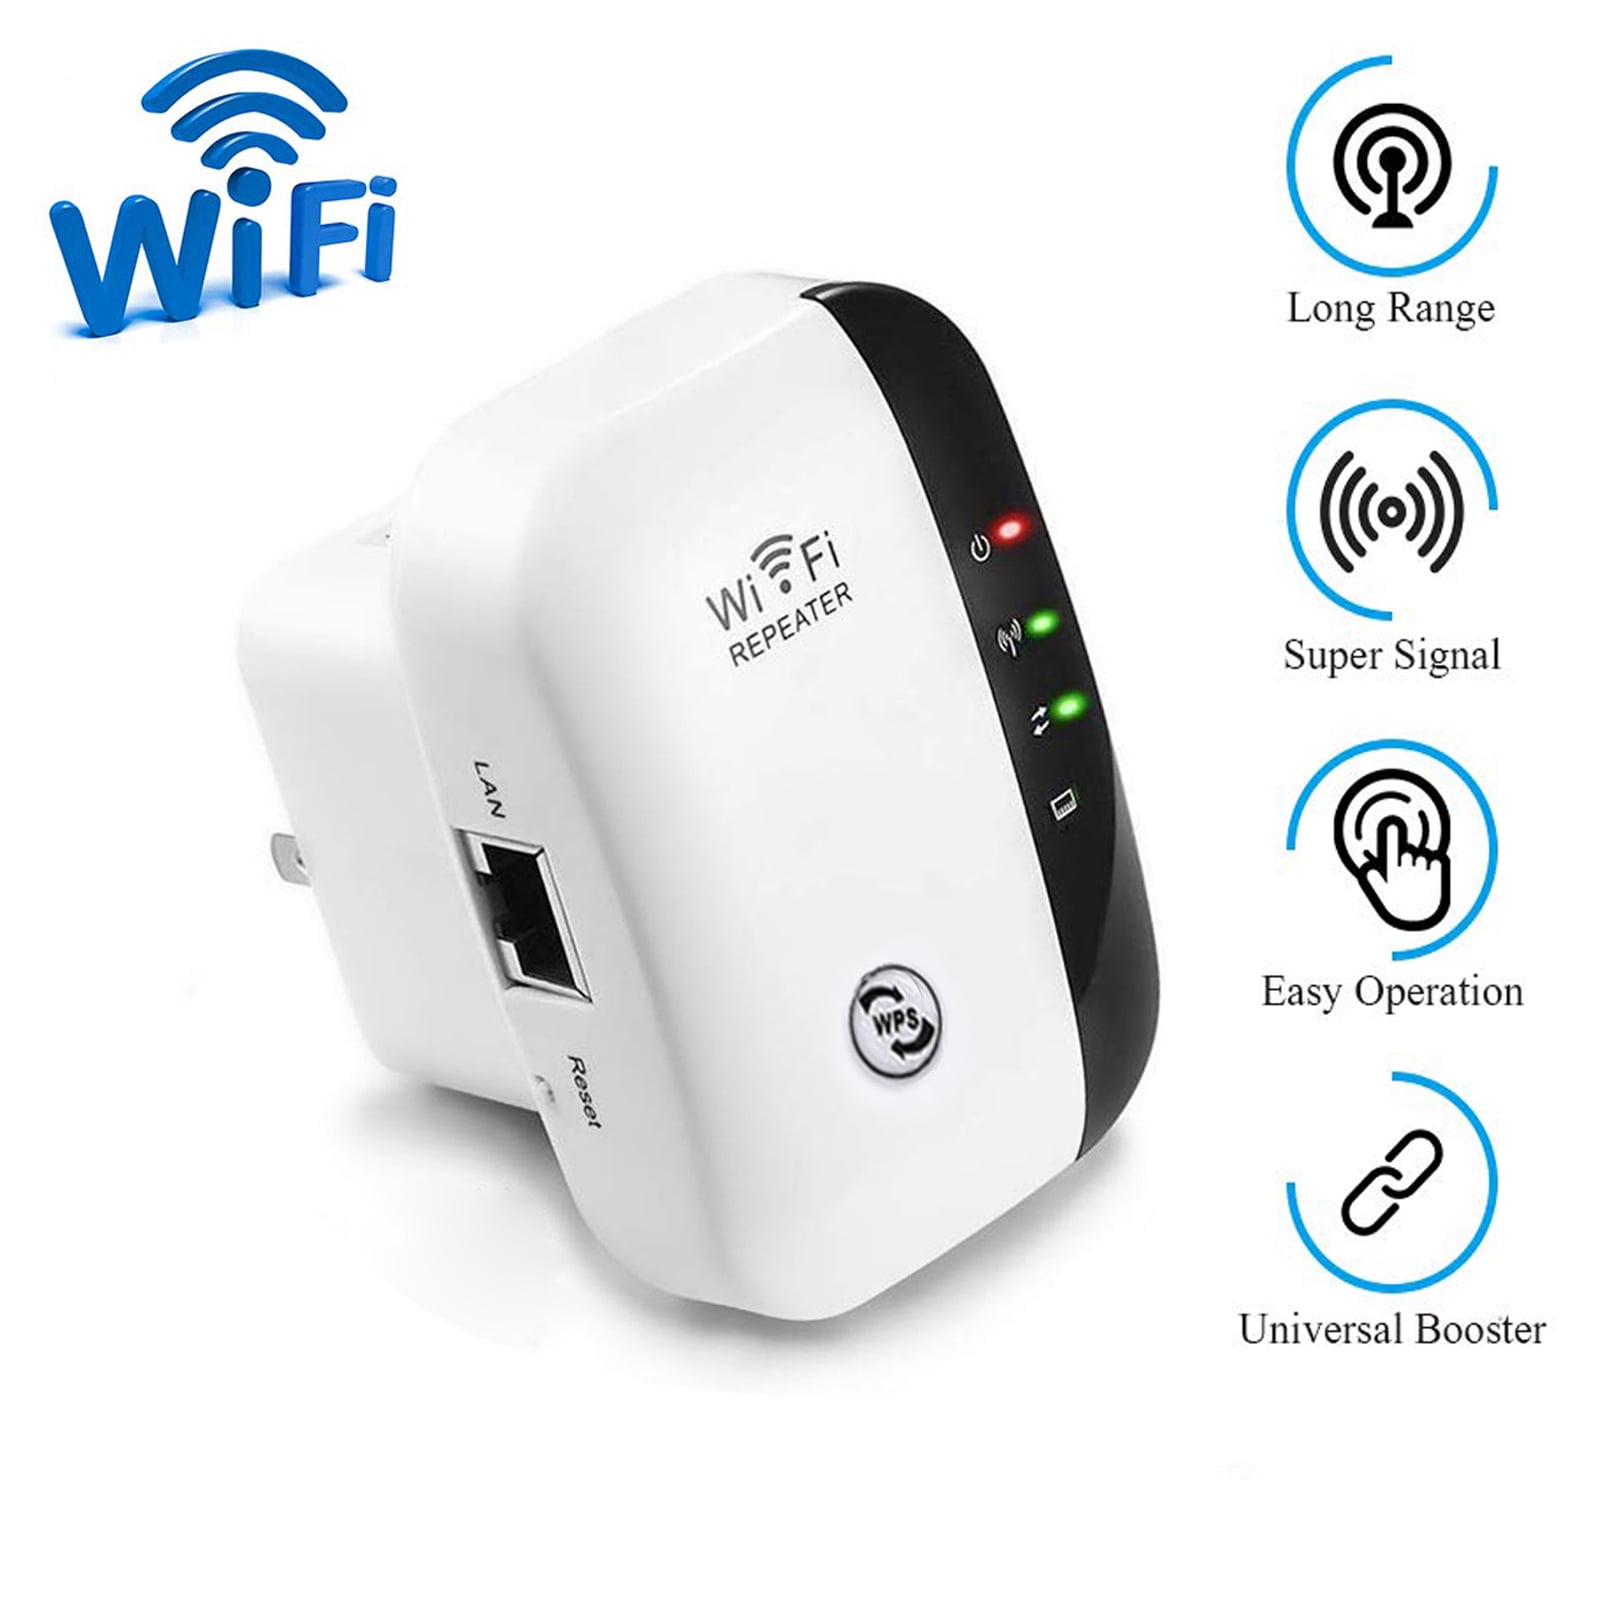 Wireless N Repeater Network Router AP WiFi Signal Range Extender 